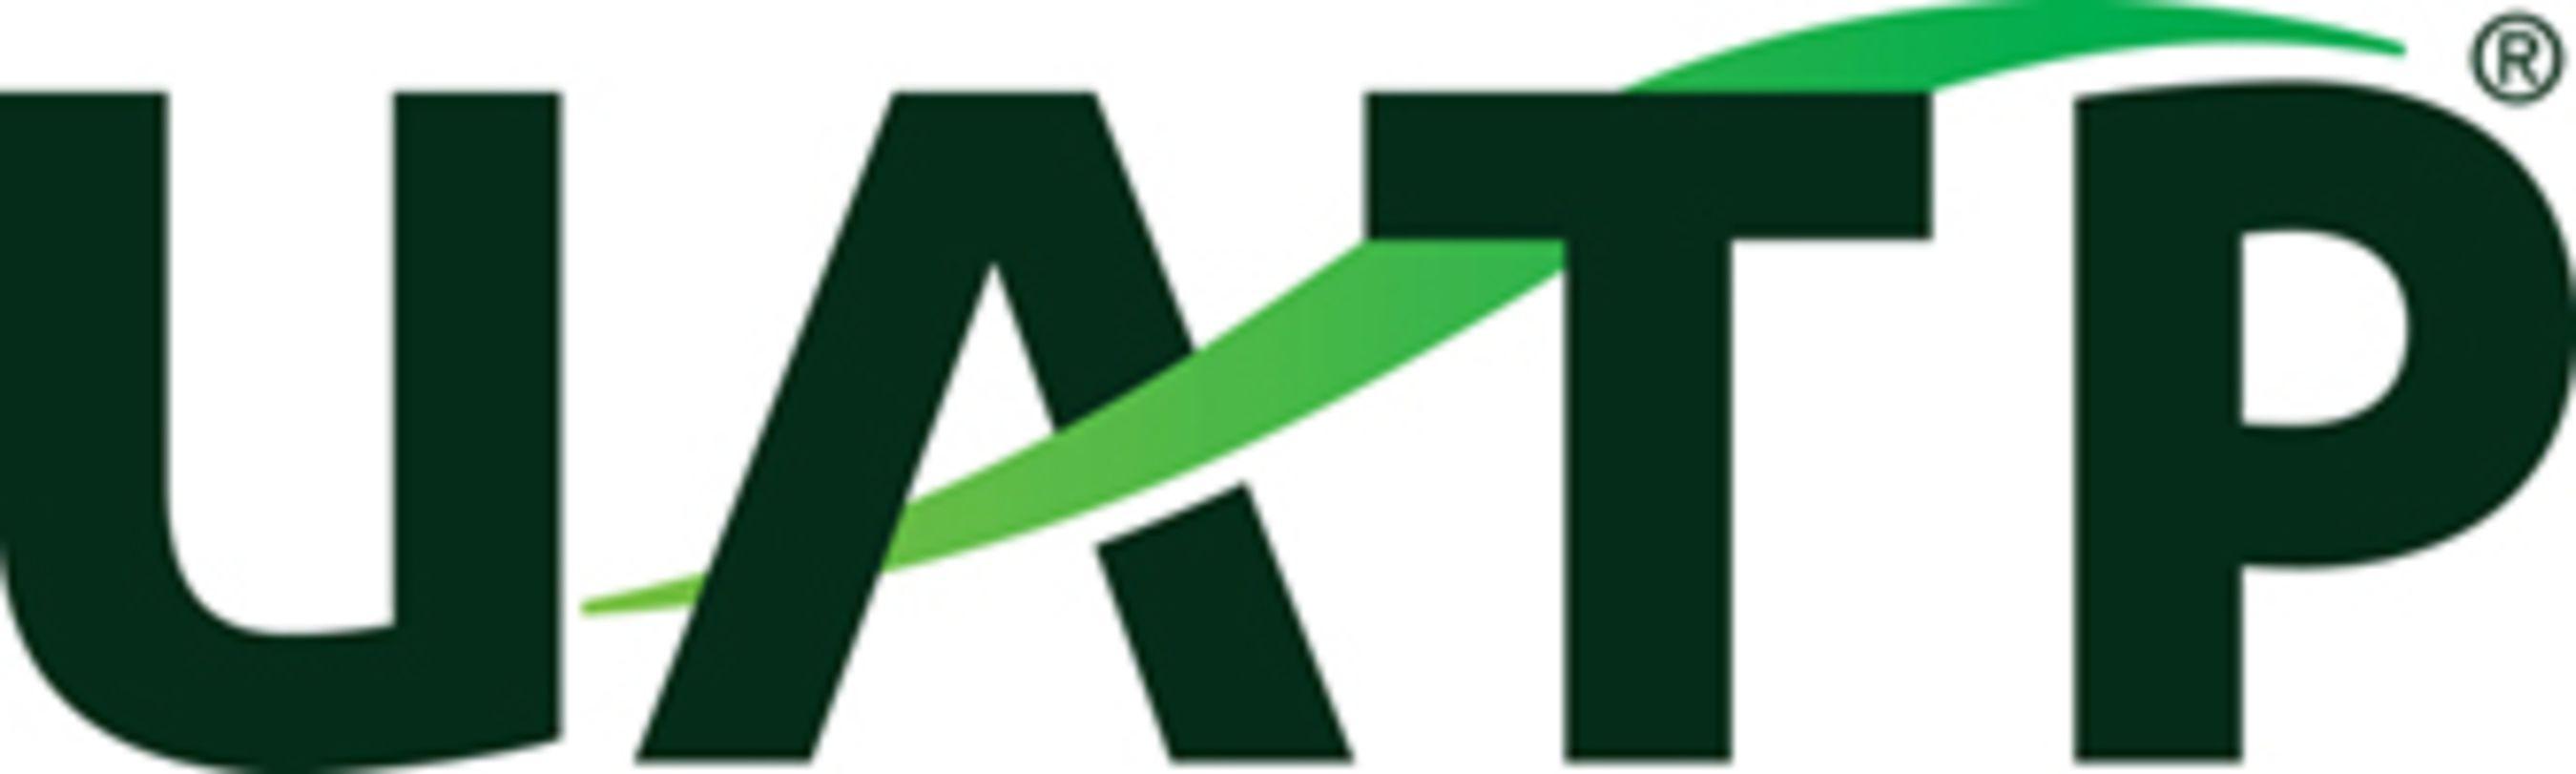 Green Payment Business Logo - UATP Teams With Affirm To Deliver New Payment Solutions For Its ...